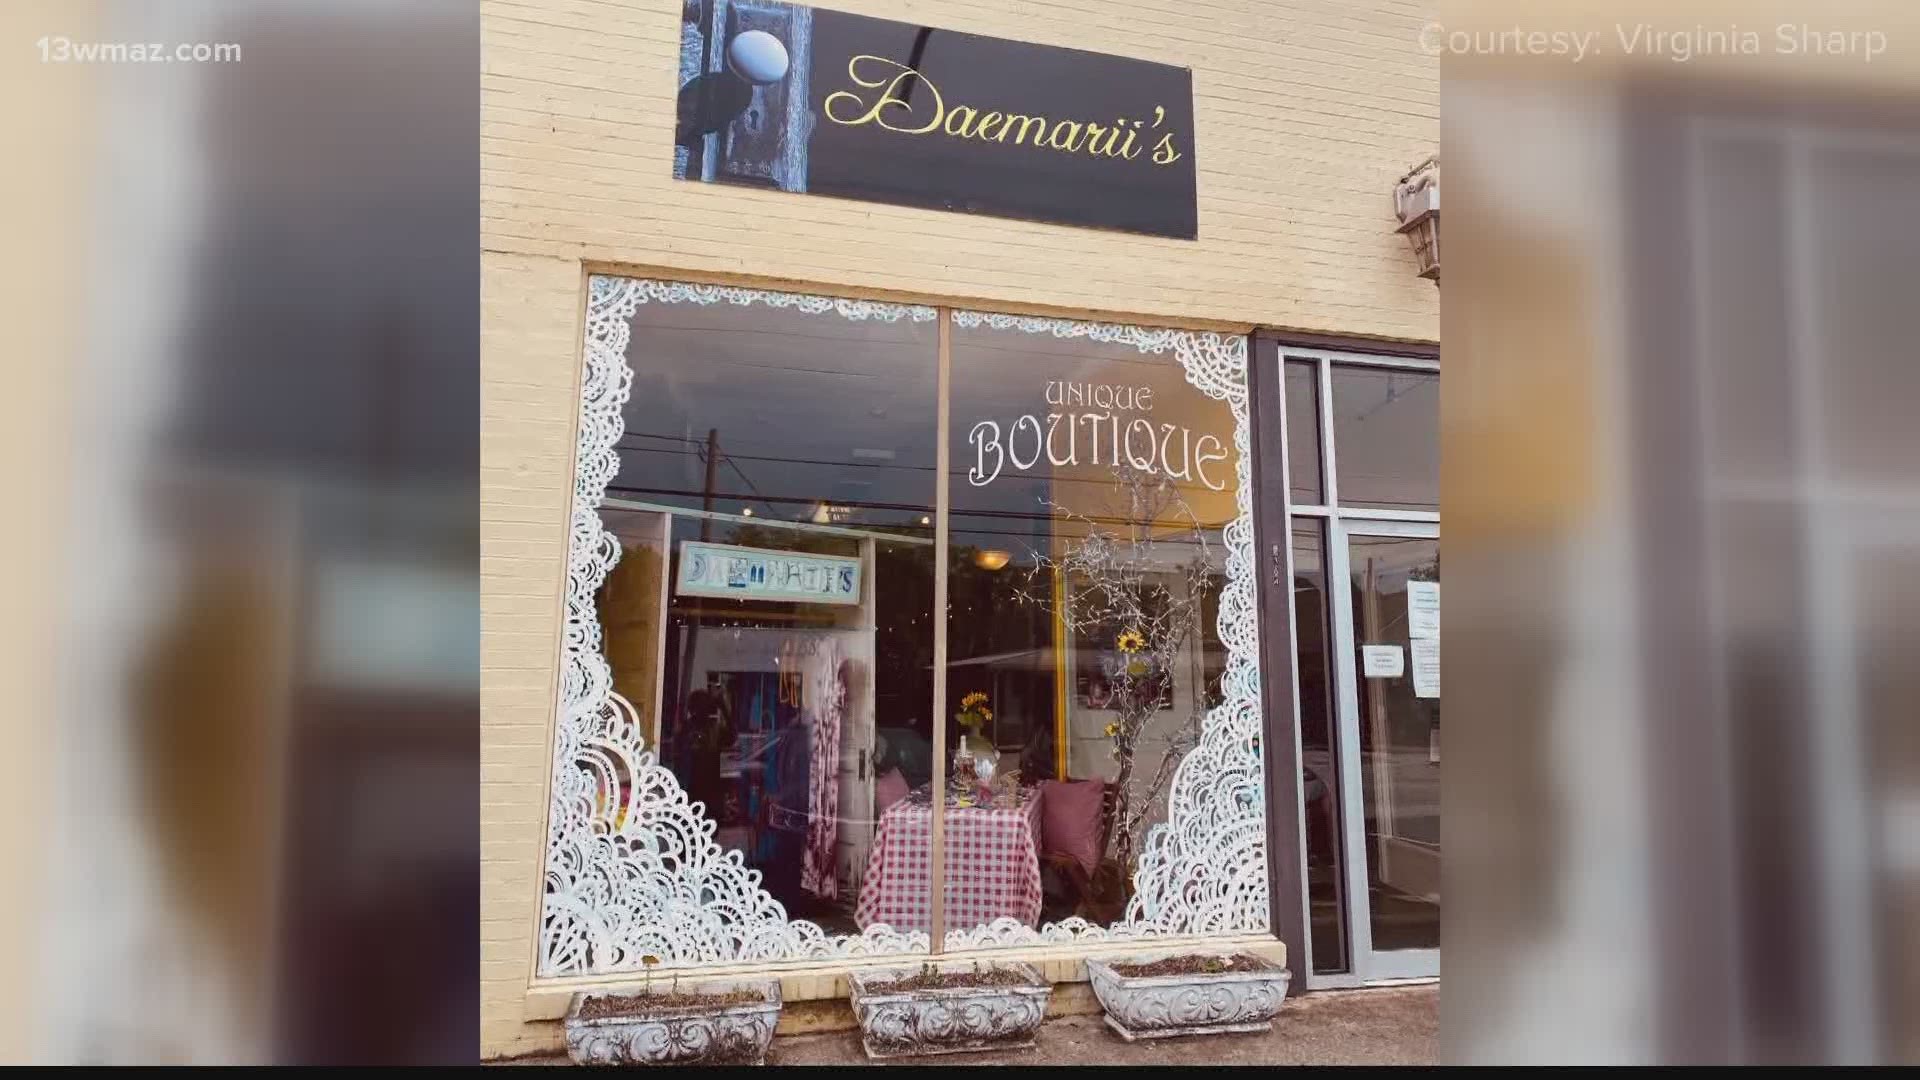 With many businesses having to close because of COVID-19, one business owner has found a creative way to still make sales.